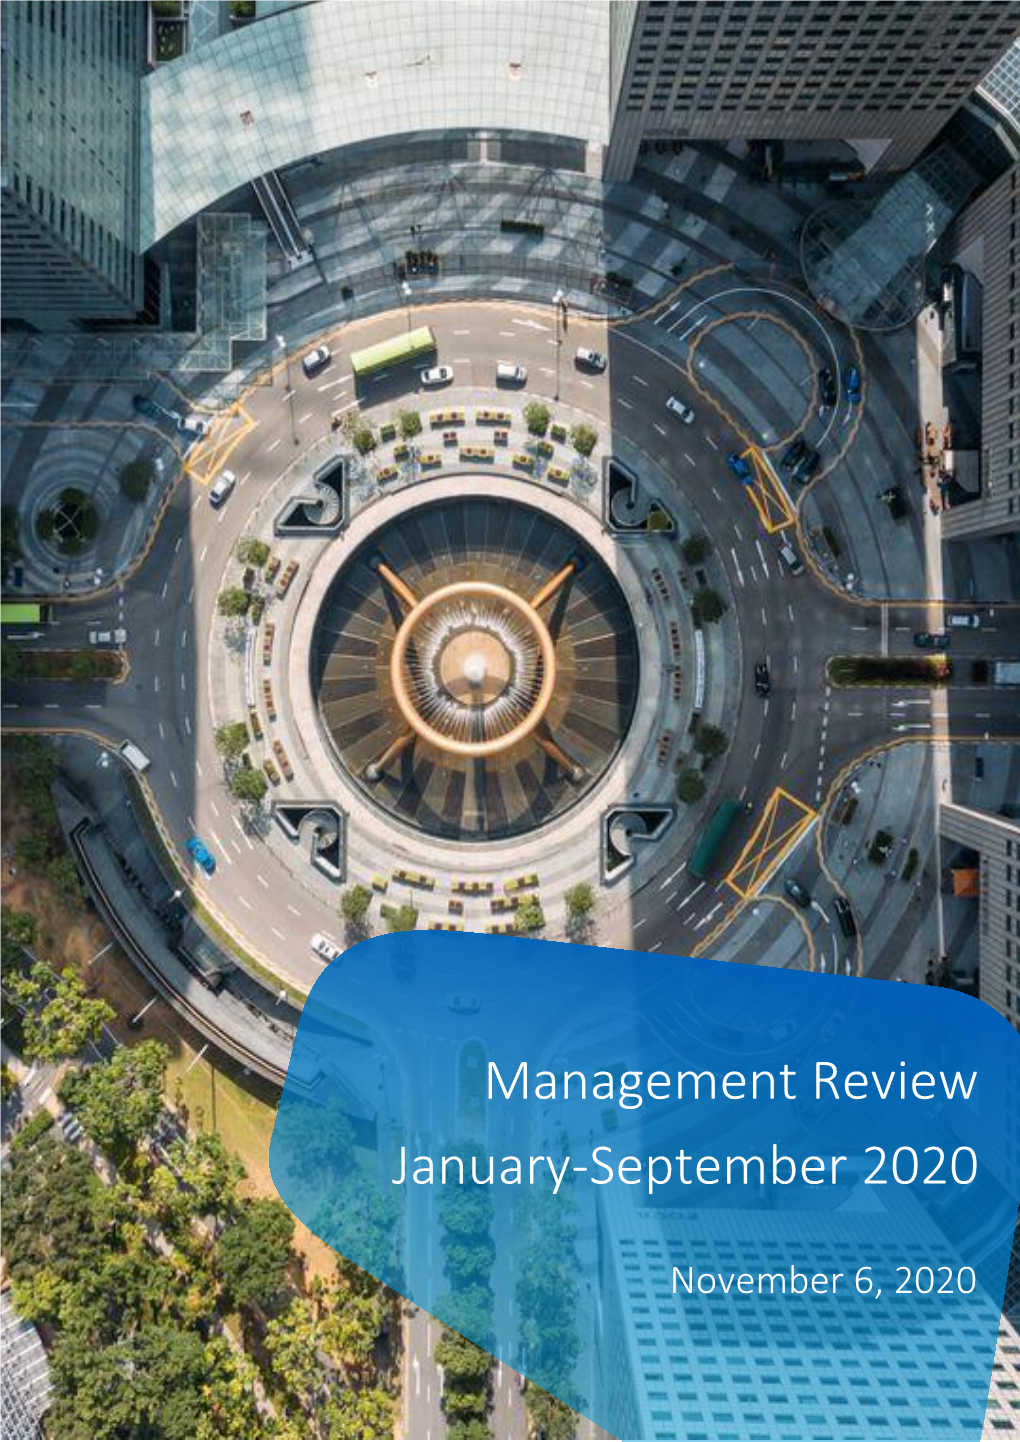 Management Review January-September 2020